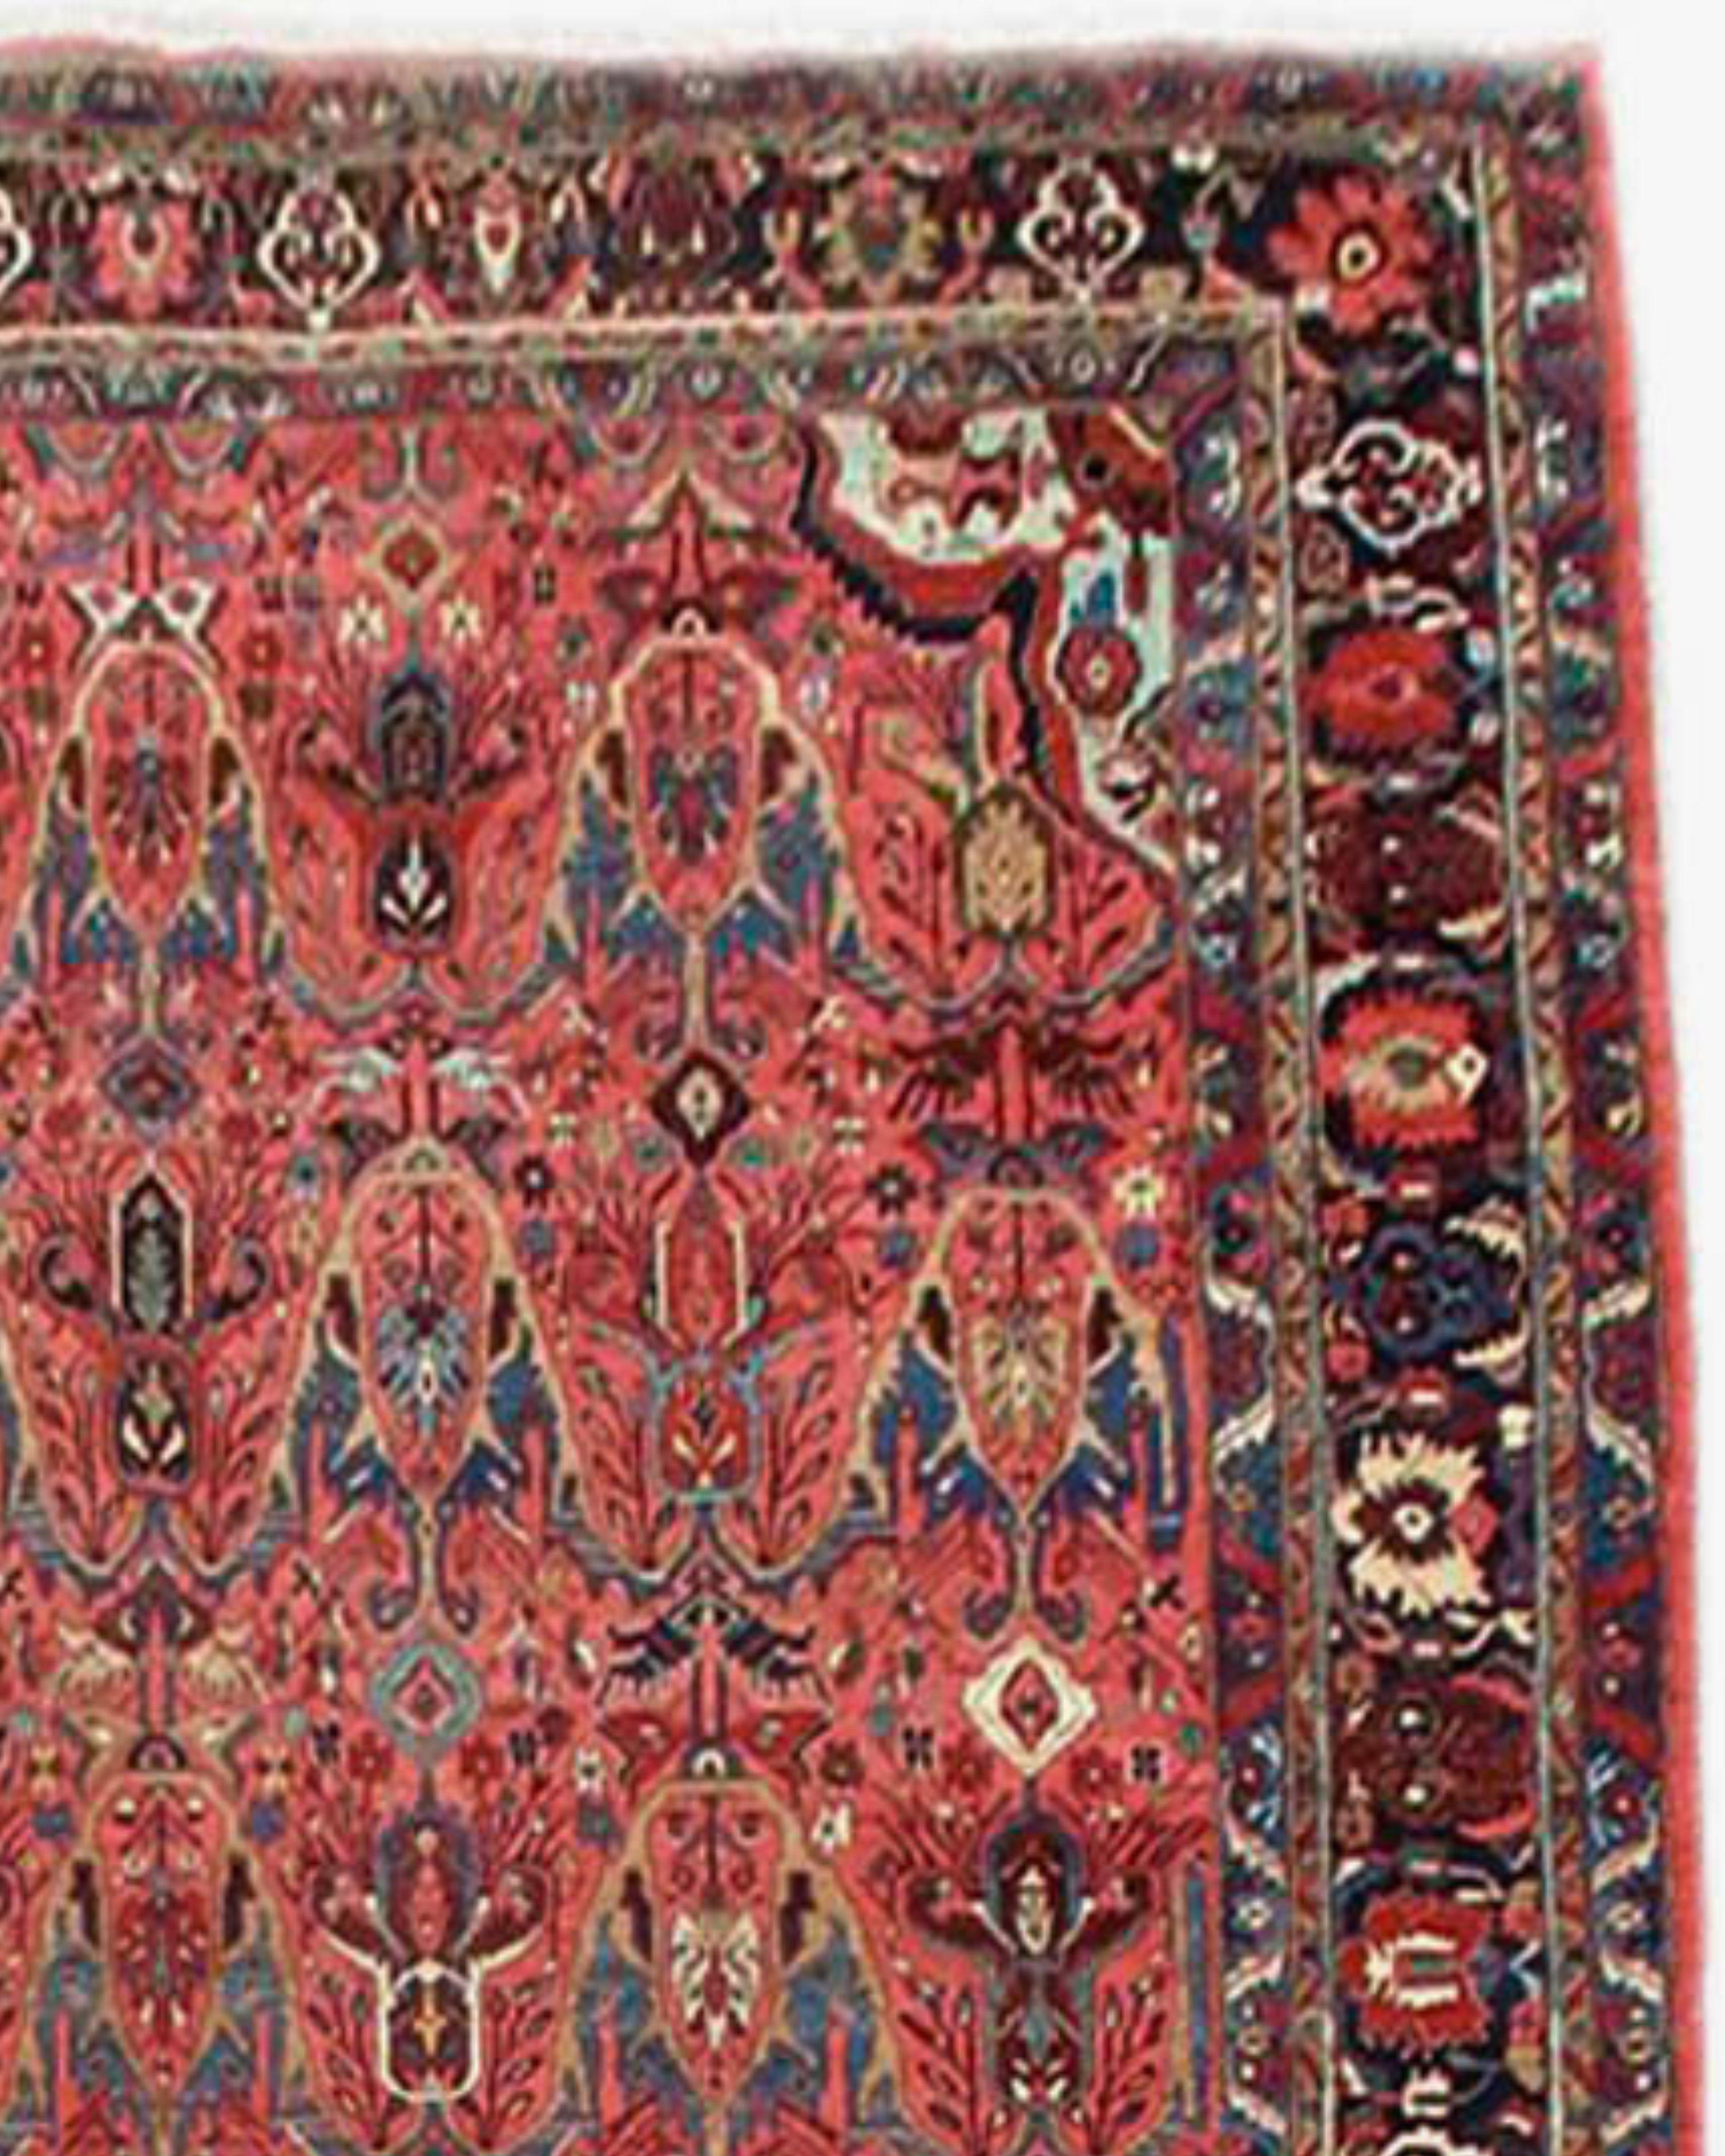 Antique Persian Bidjar Rug, Early 20th Century

Rows of alternating stylized Persian palmettes are drawn against the rose-madder ground of this elegant Bidjar carpet. Though it incorporates an allover field design, the rug also features small